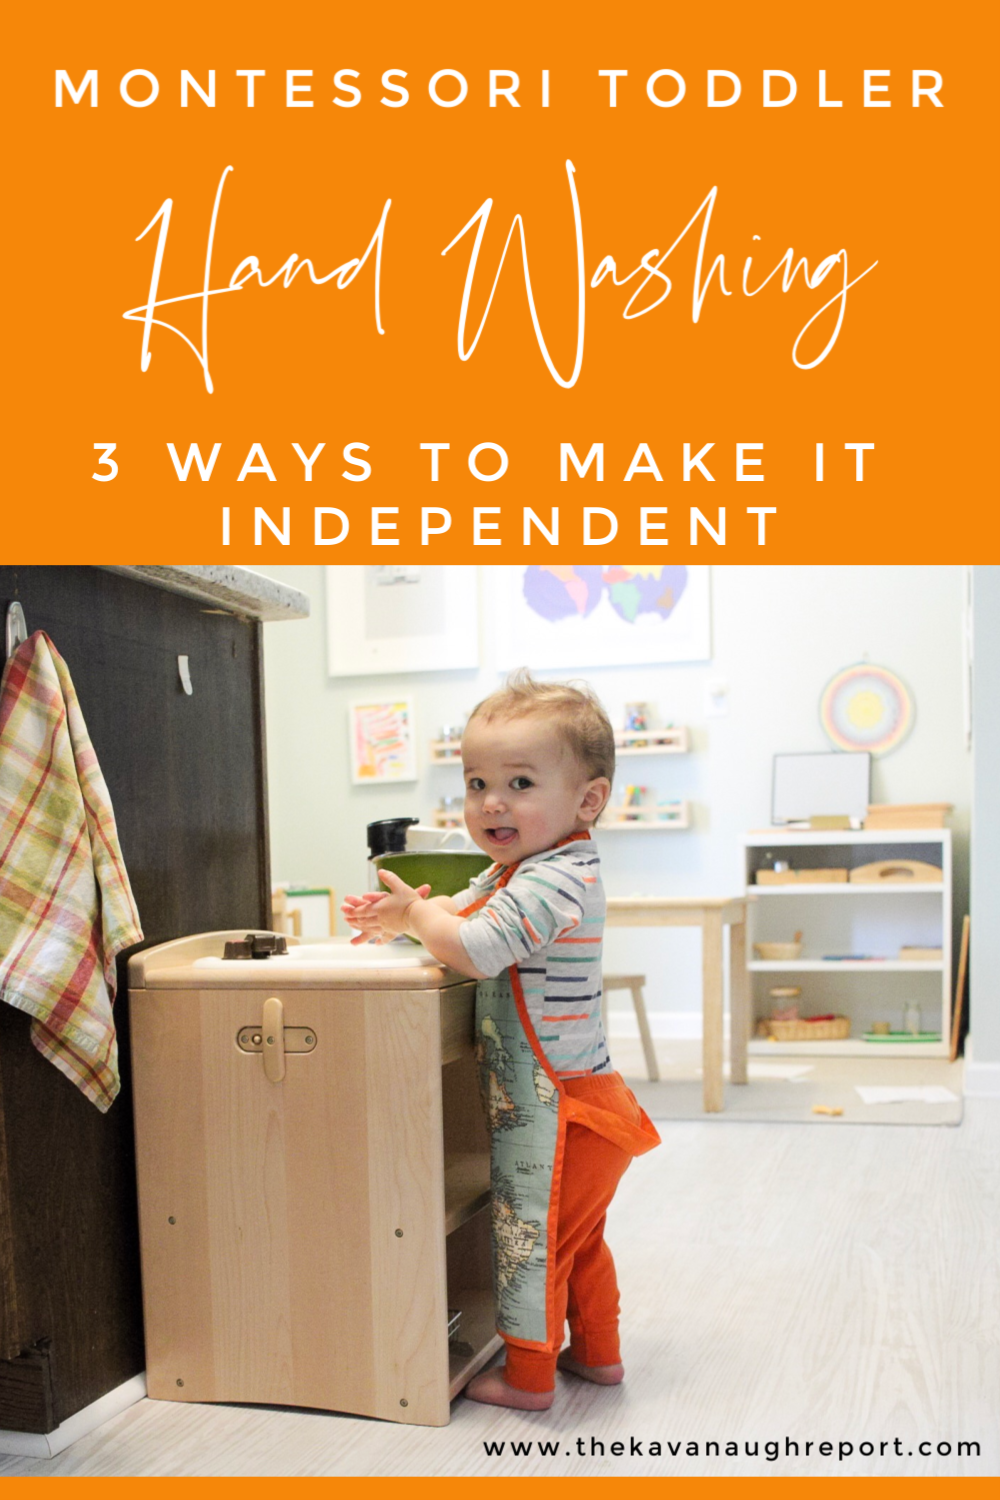 3 Montessori ways to consider adding independent hand washing to your home for your toddler.